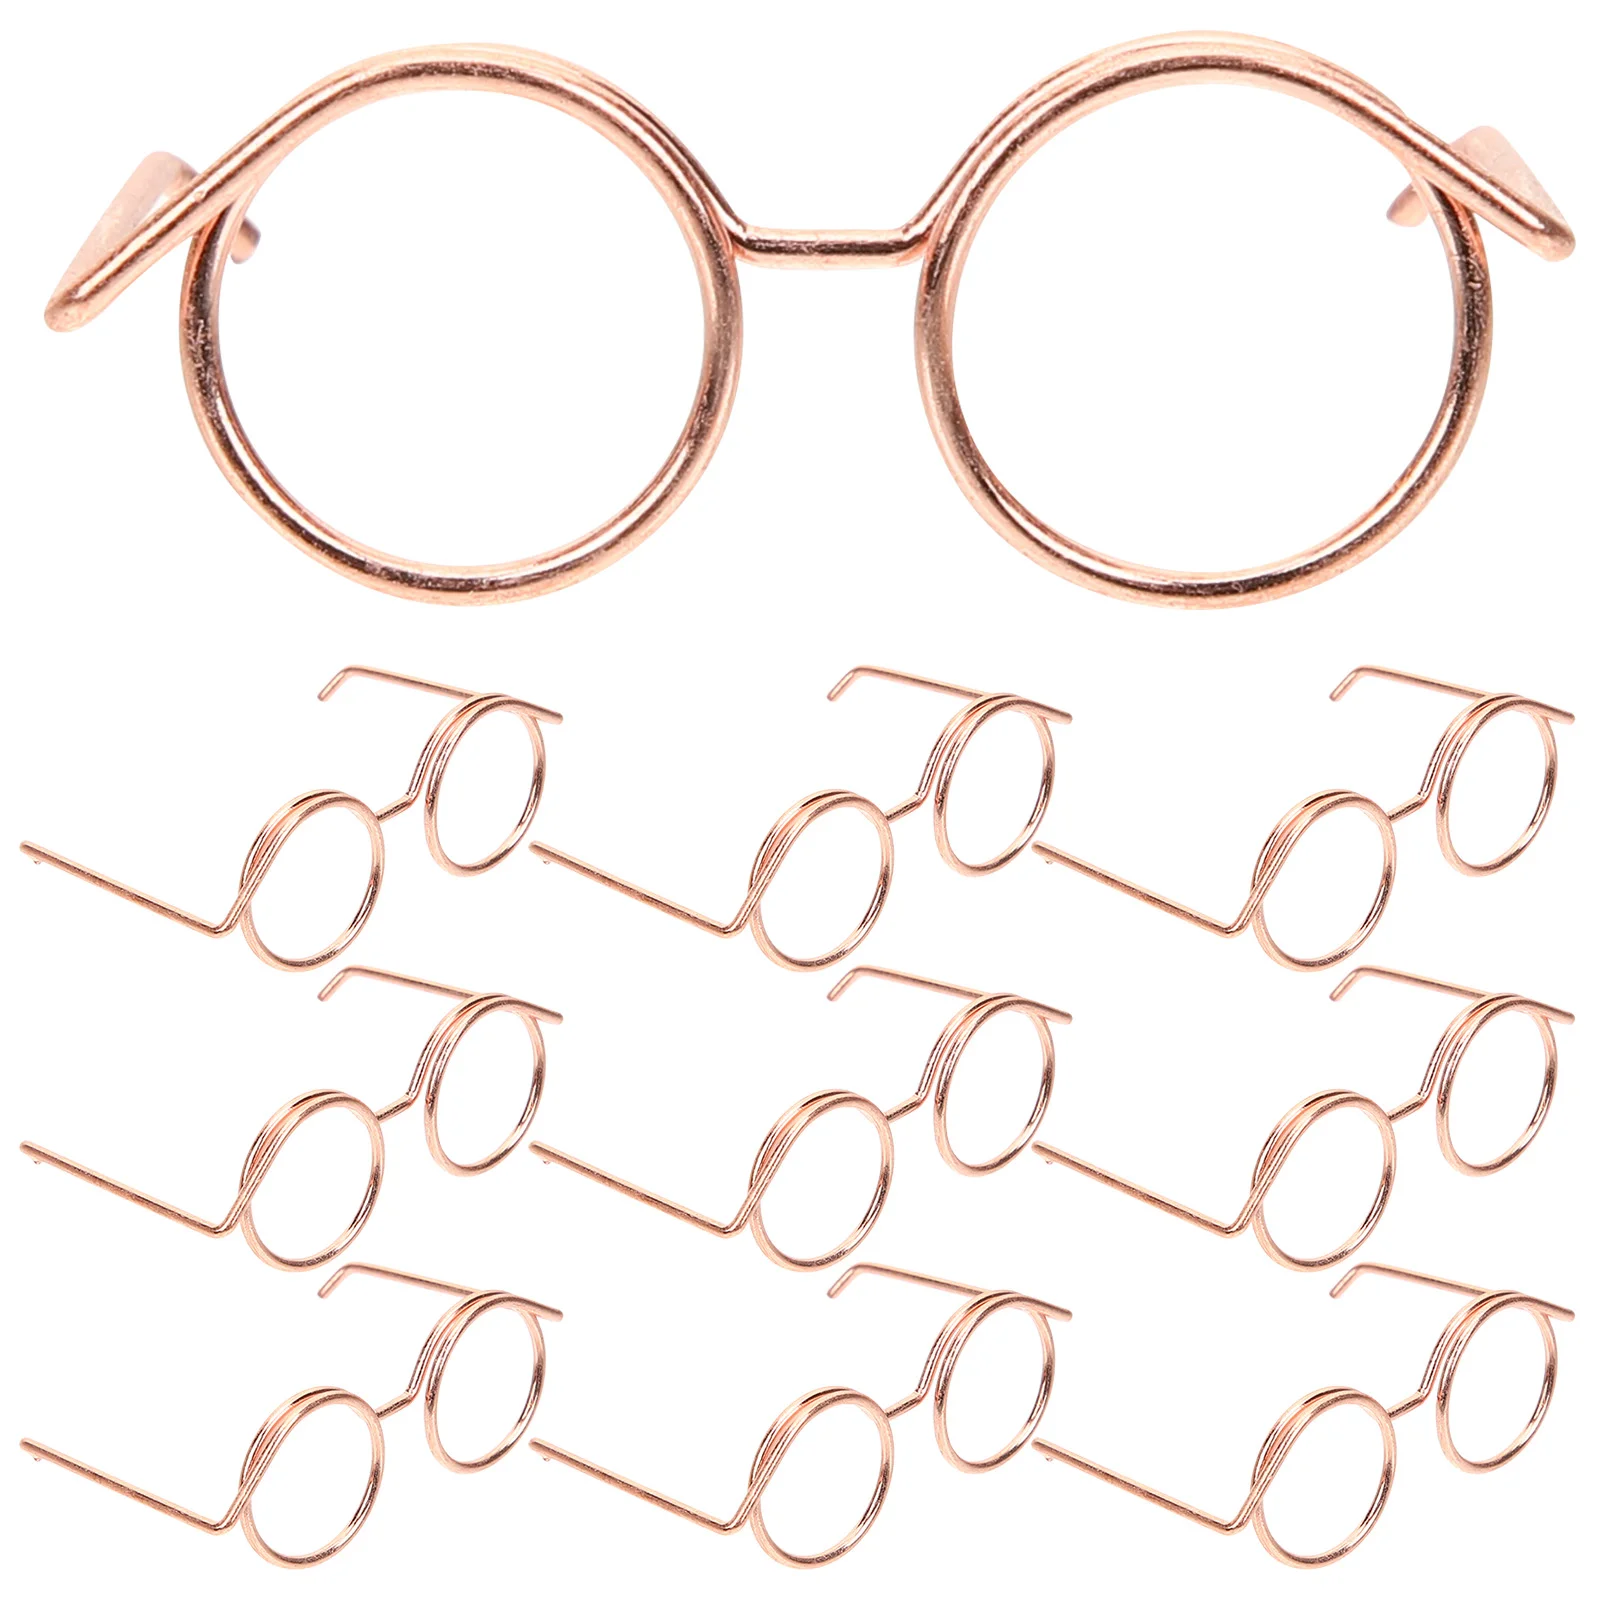 1 2 5pcs round doll glasses dolls fashion retro eyewear for 1 6 1 12 bjd dolls glasses for mini toy eyeglasses doll accessories Retro Doll Glasses Metal Round Frame Lensless Eyewear Doll Sunglasses Doll Dress Up Accessories Children Gifts